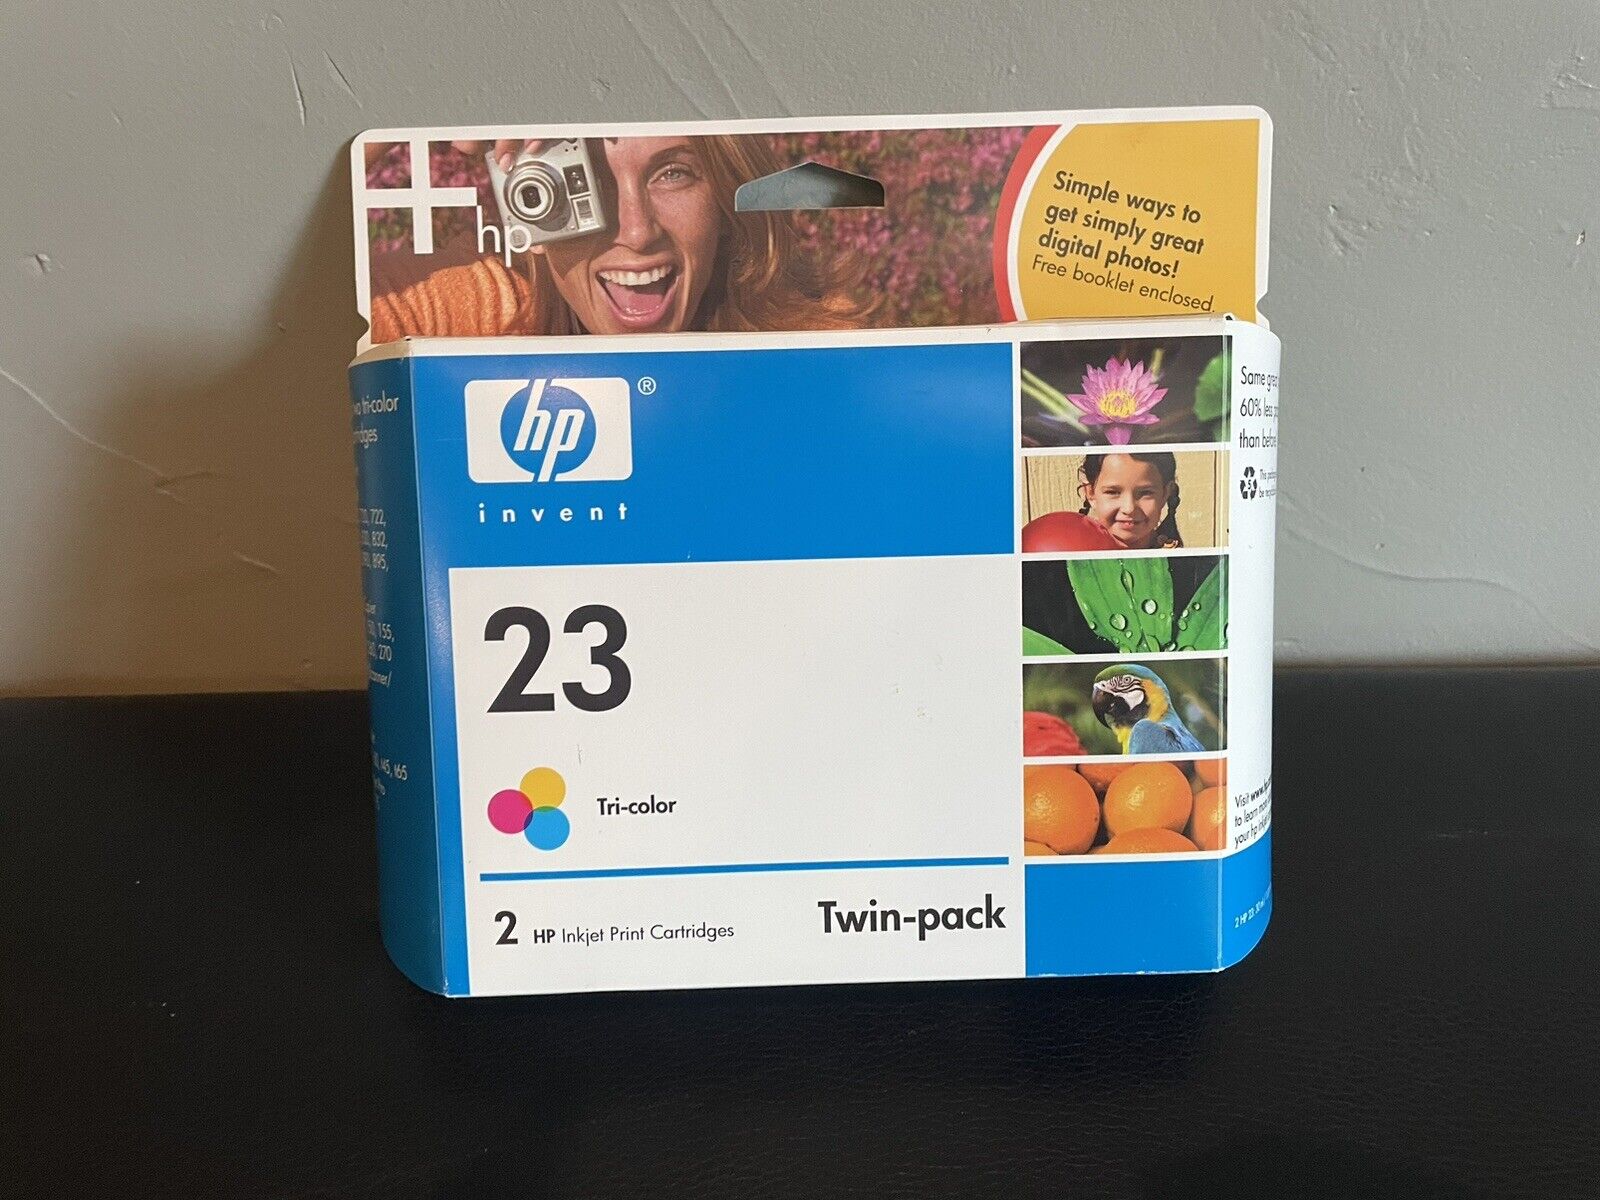 Hp Invent 23 Tri-color Inkjet Print Cartridges Twin -pack